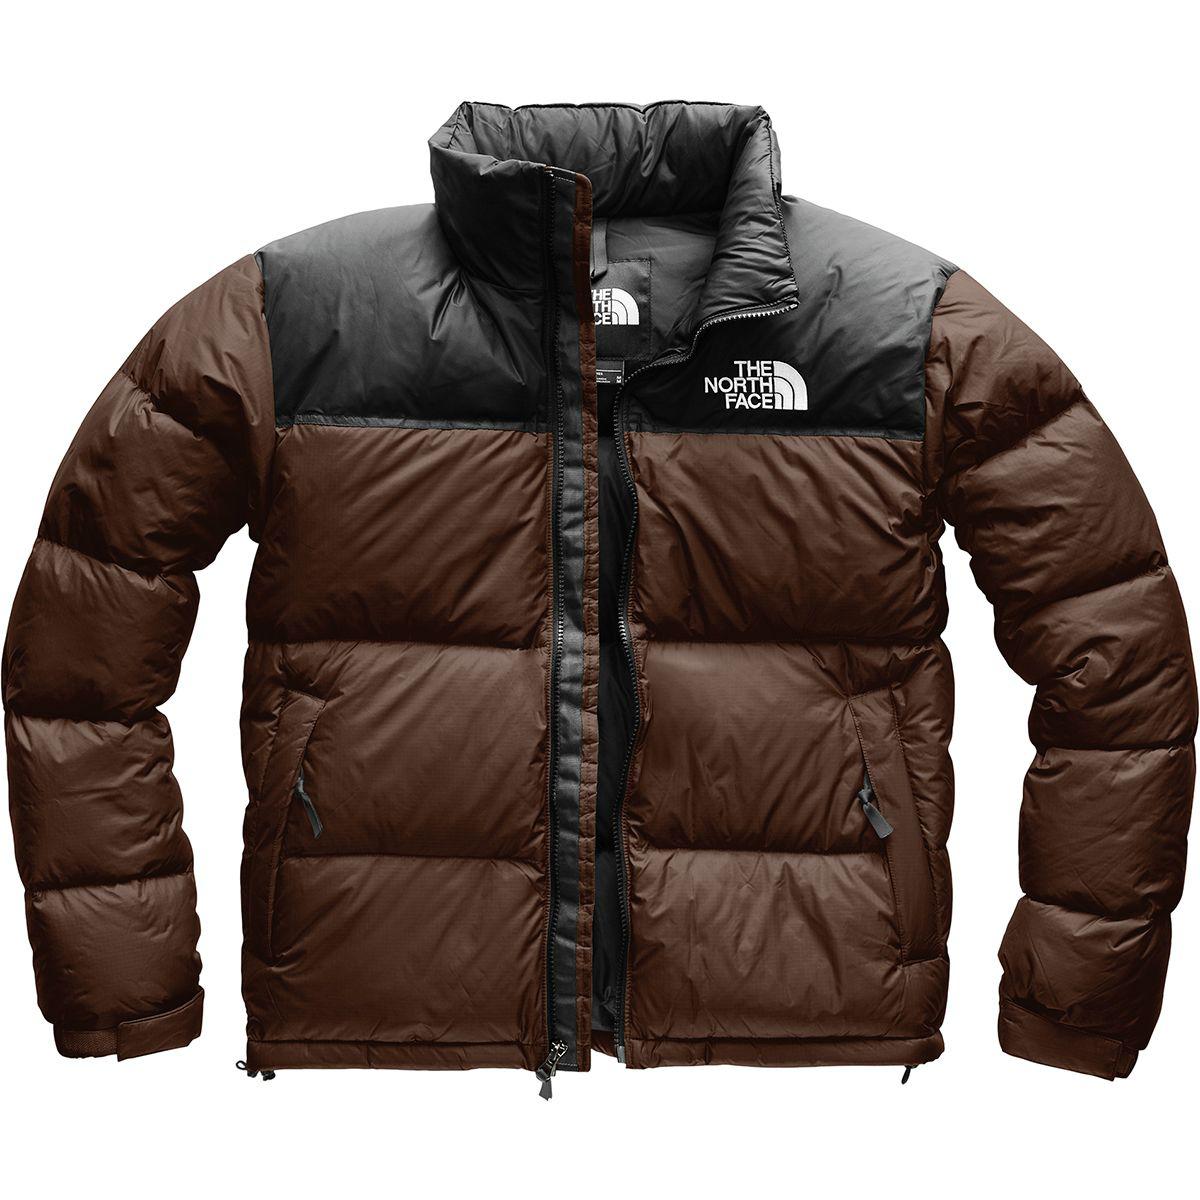 Lyst - The North Face 1996 Retro Nuptse Jacket in Brown for Men - Save 0.40160642570280913%